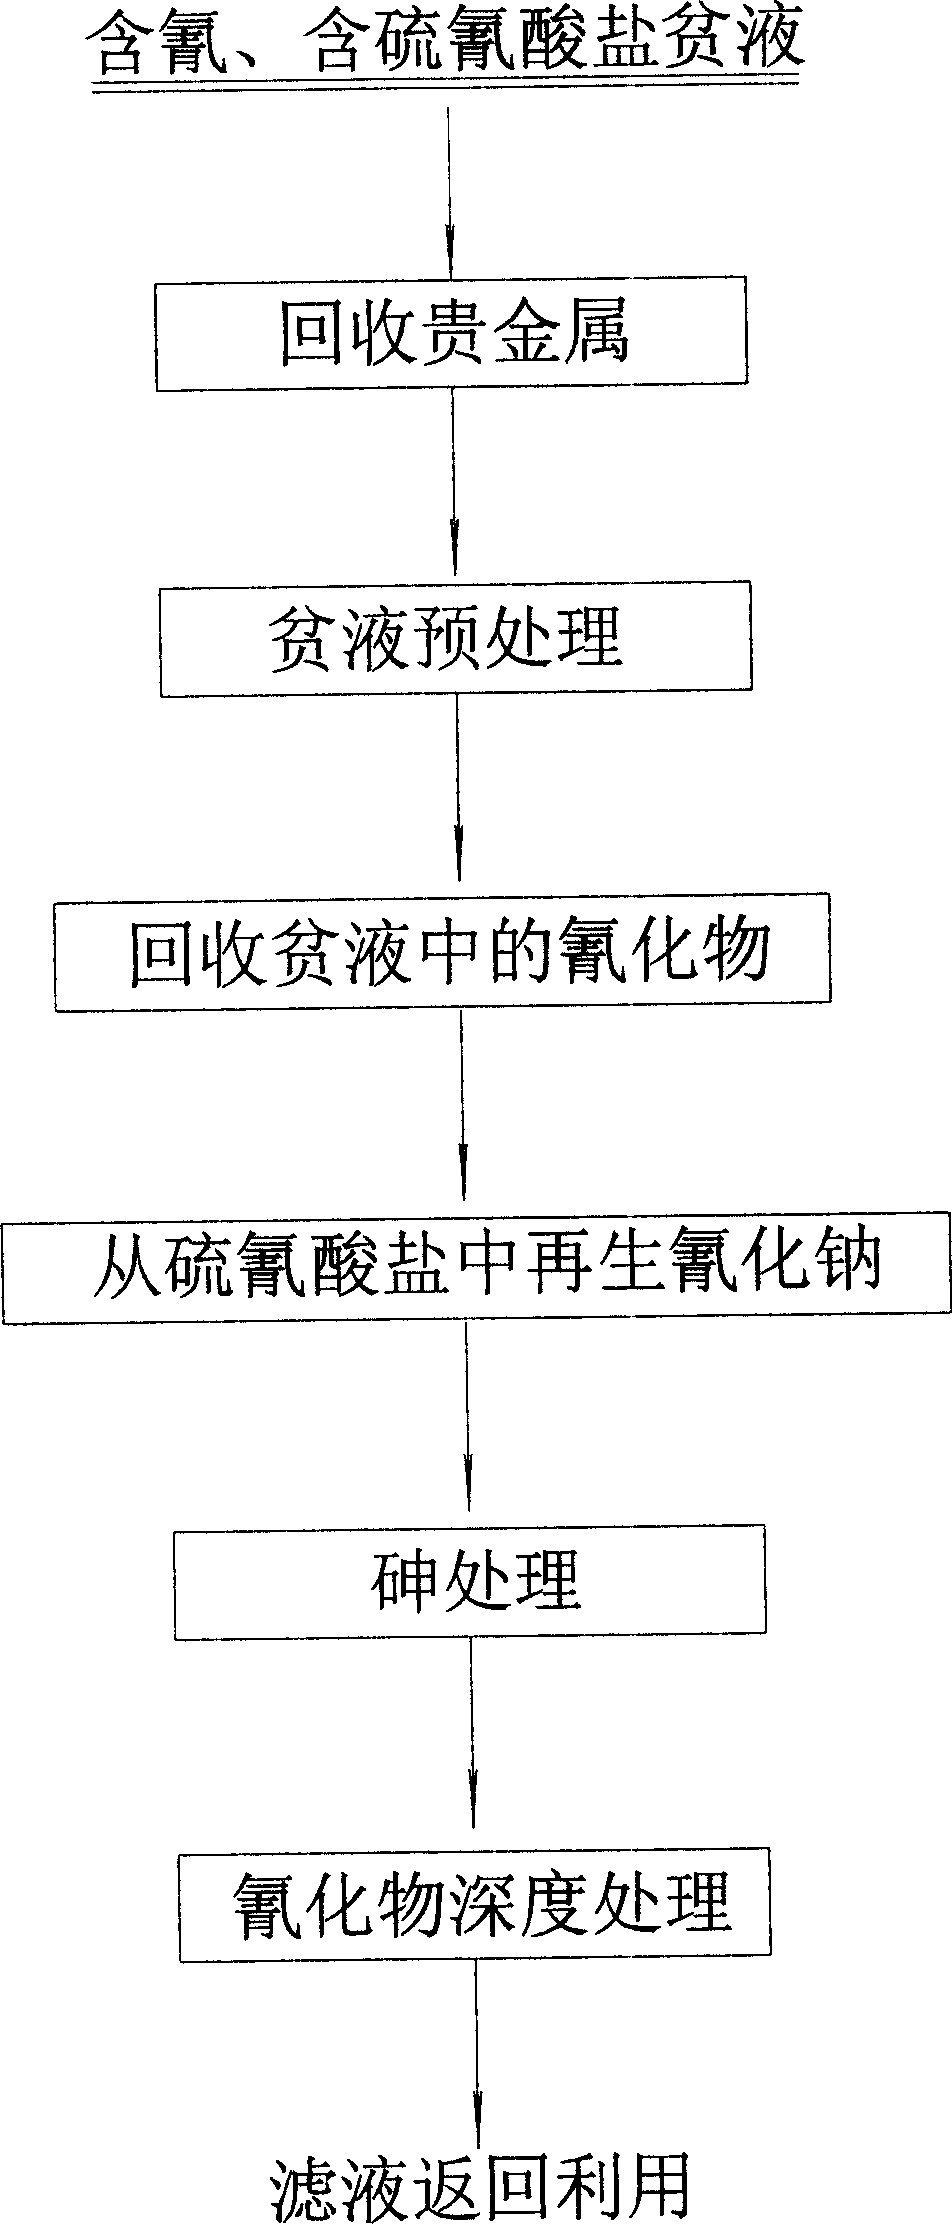 Method for regenerating sodium cyanide from solutions containing cyanogen and thiocyanate